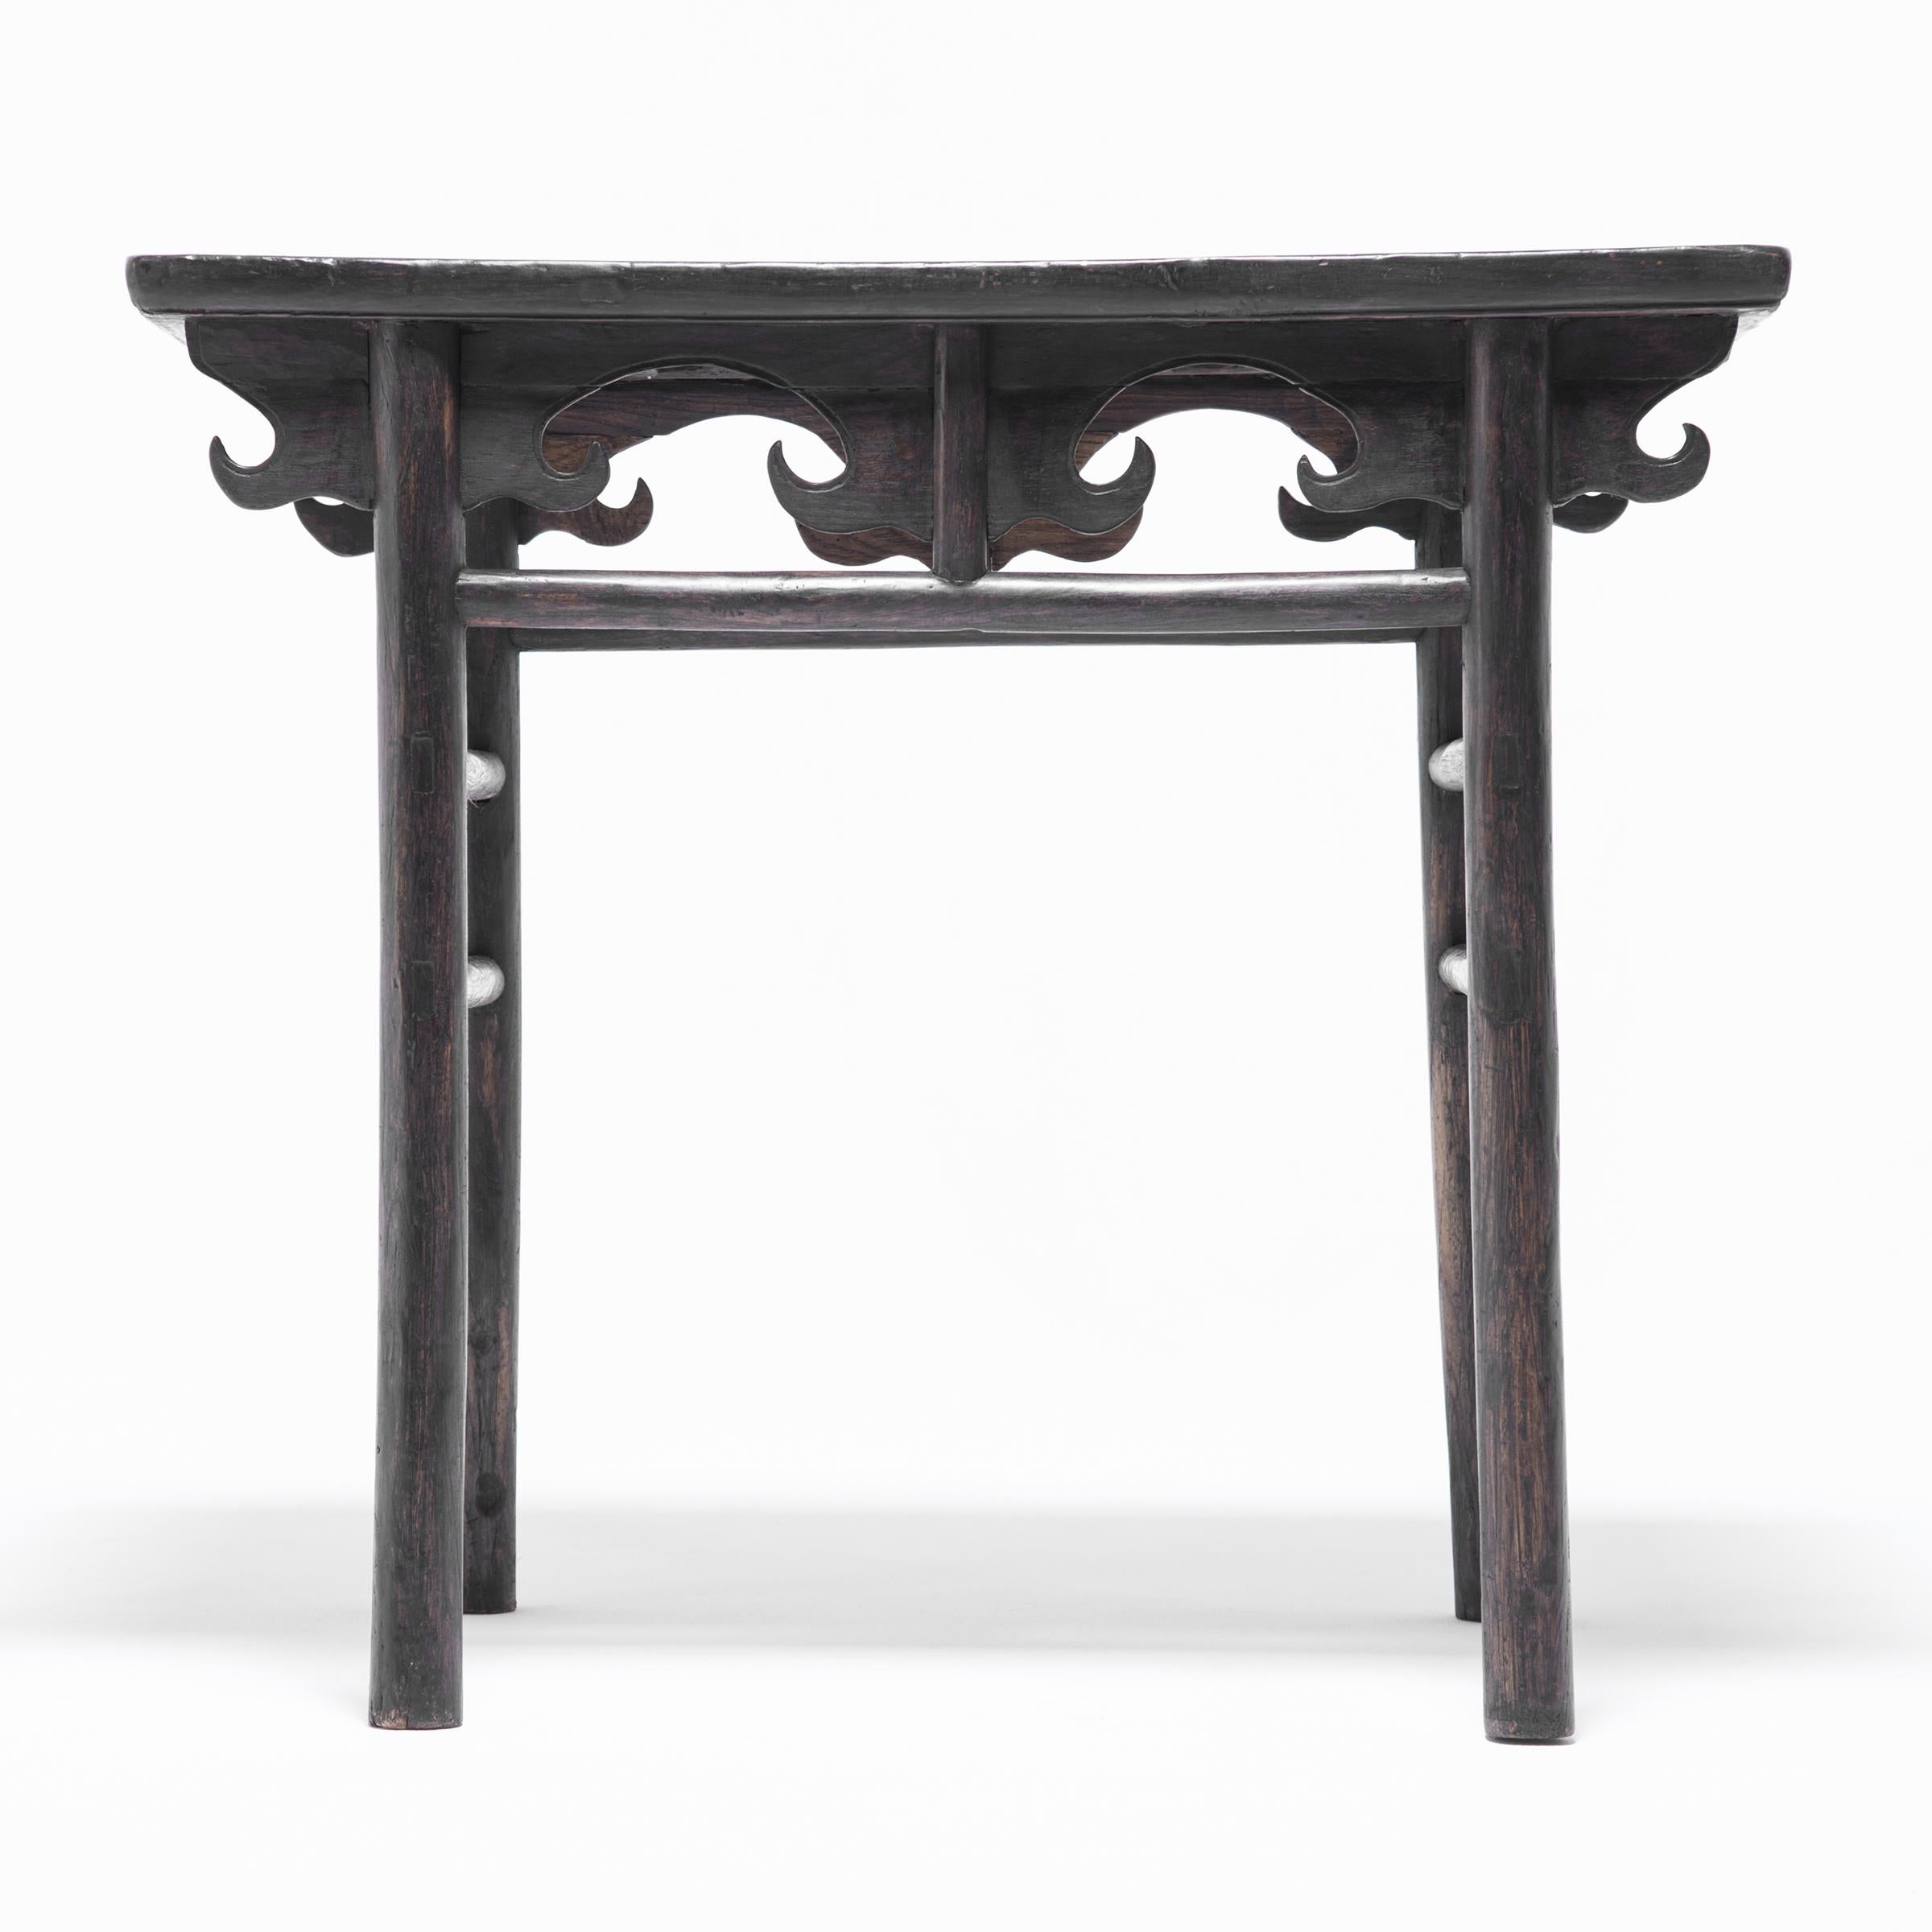 This exquisitely crafted elmwood table was made over 150 years ago in the Shanxi region of China. The simple and sophisticated construction is dramatically highlighted by the way the spandrels come together with the spirited apron motif to create a